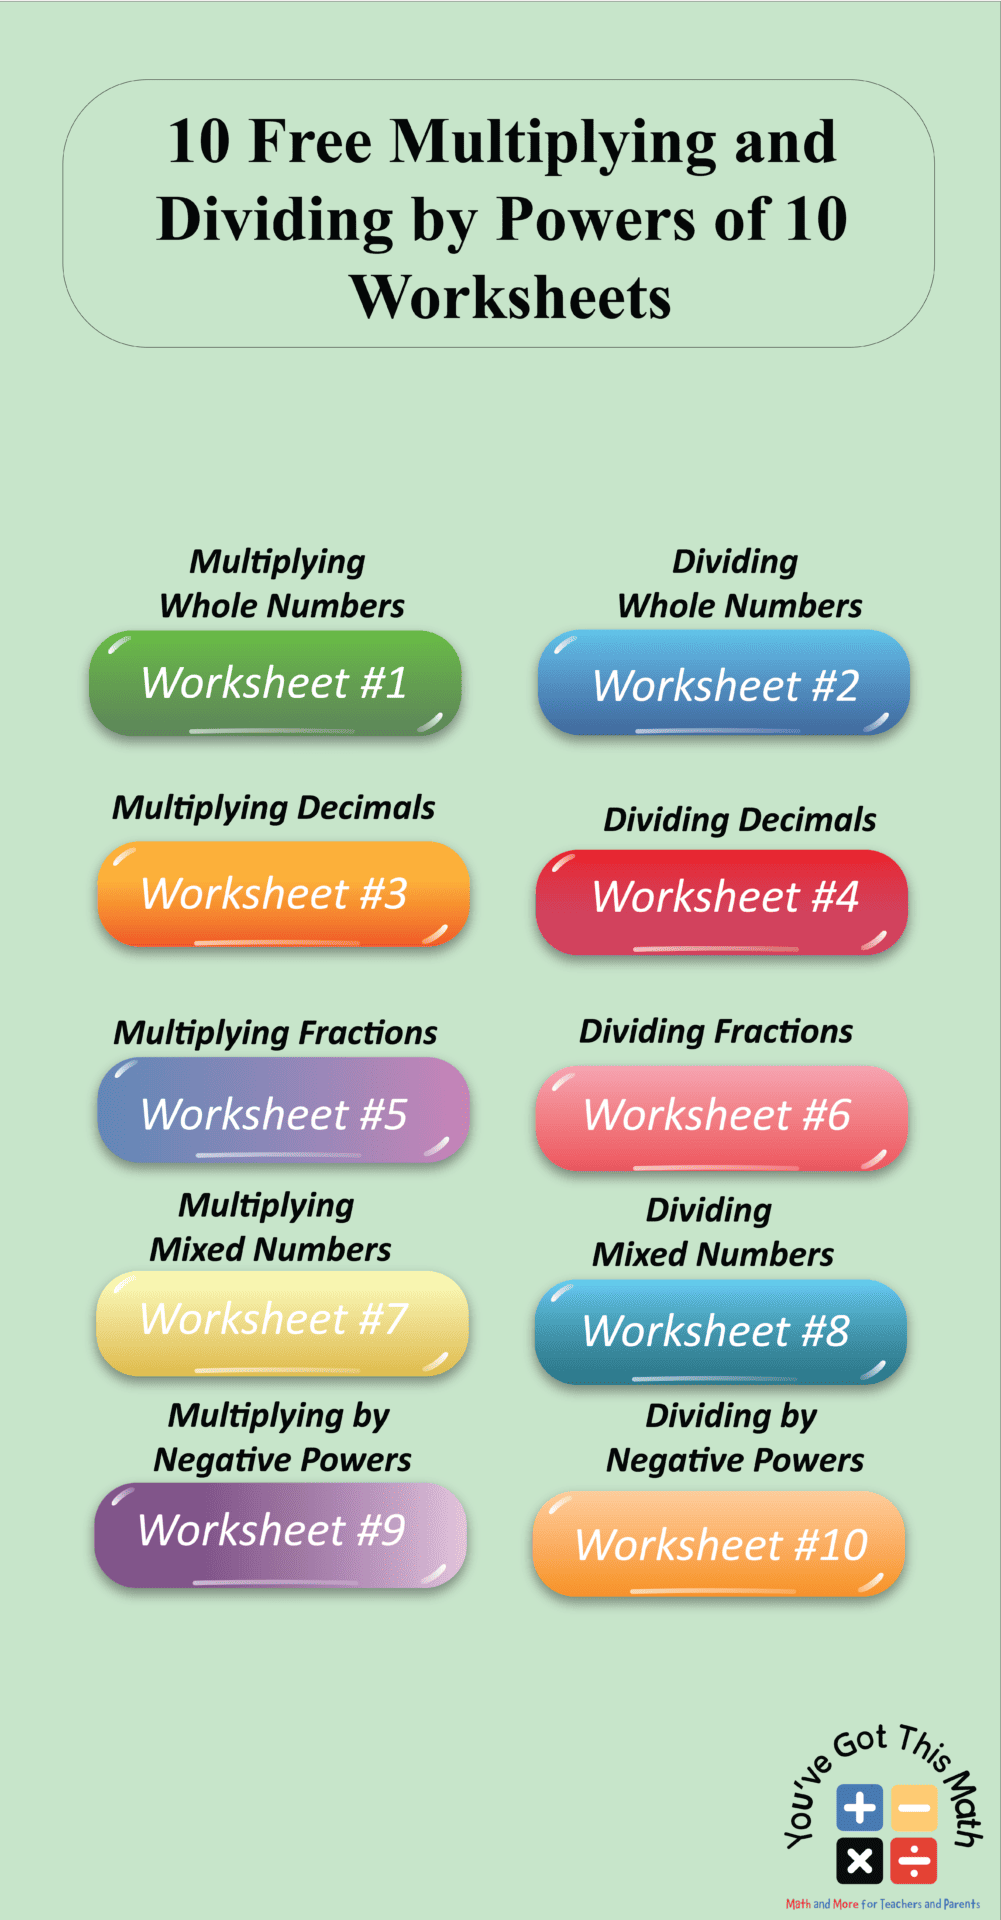 10-free-multiplying-and-dividing-by-powers-of-10-worksheets